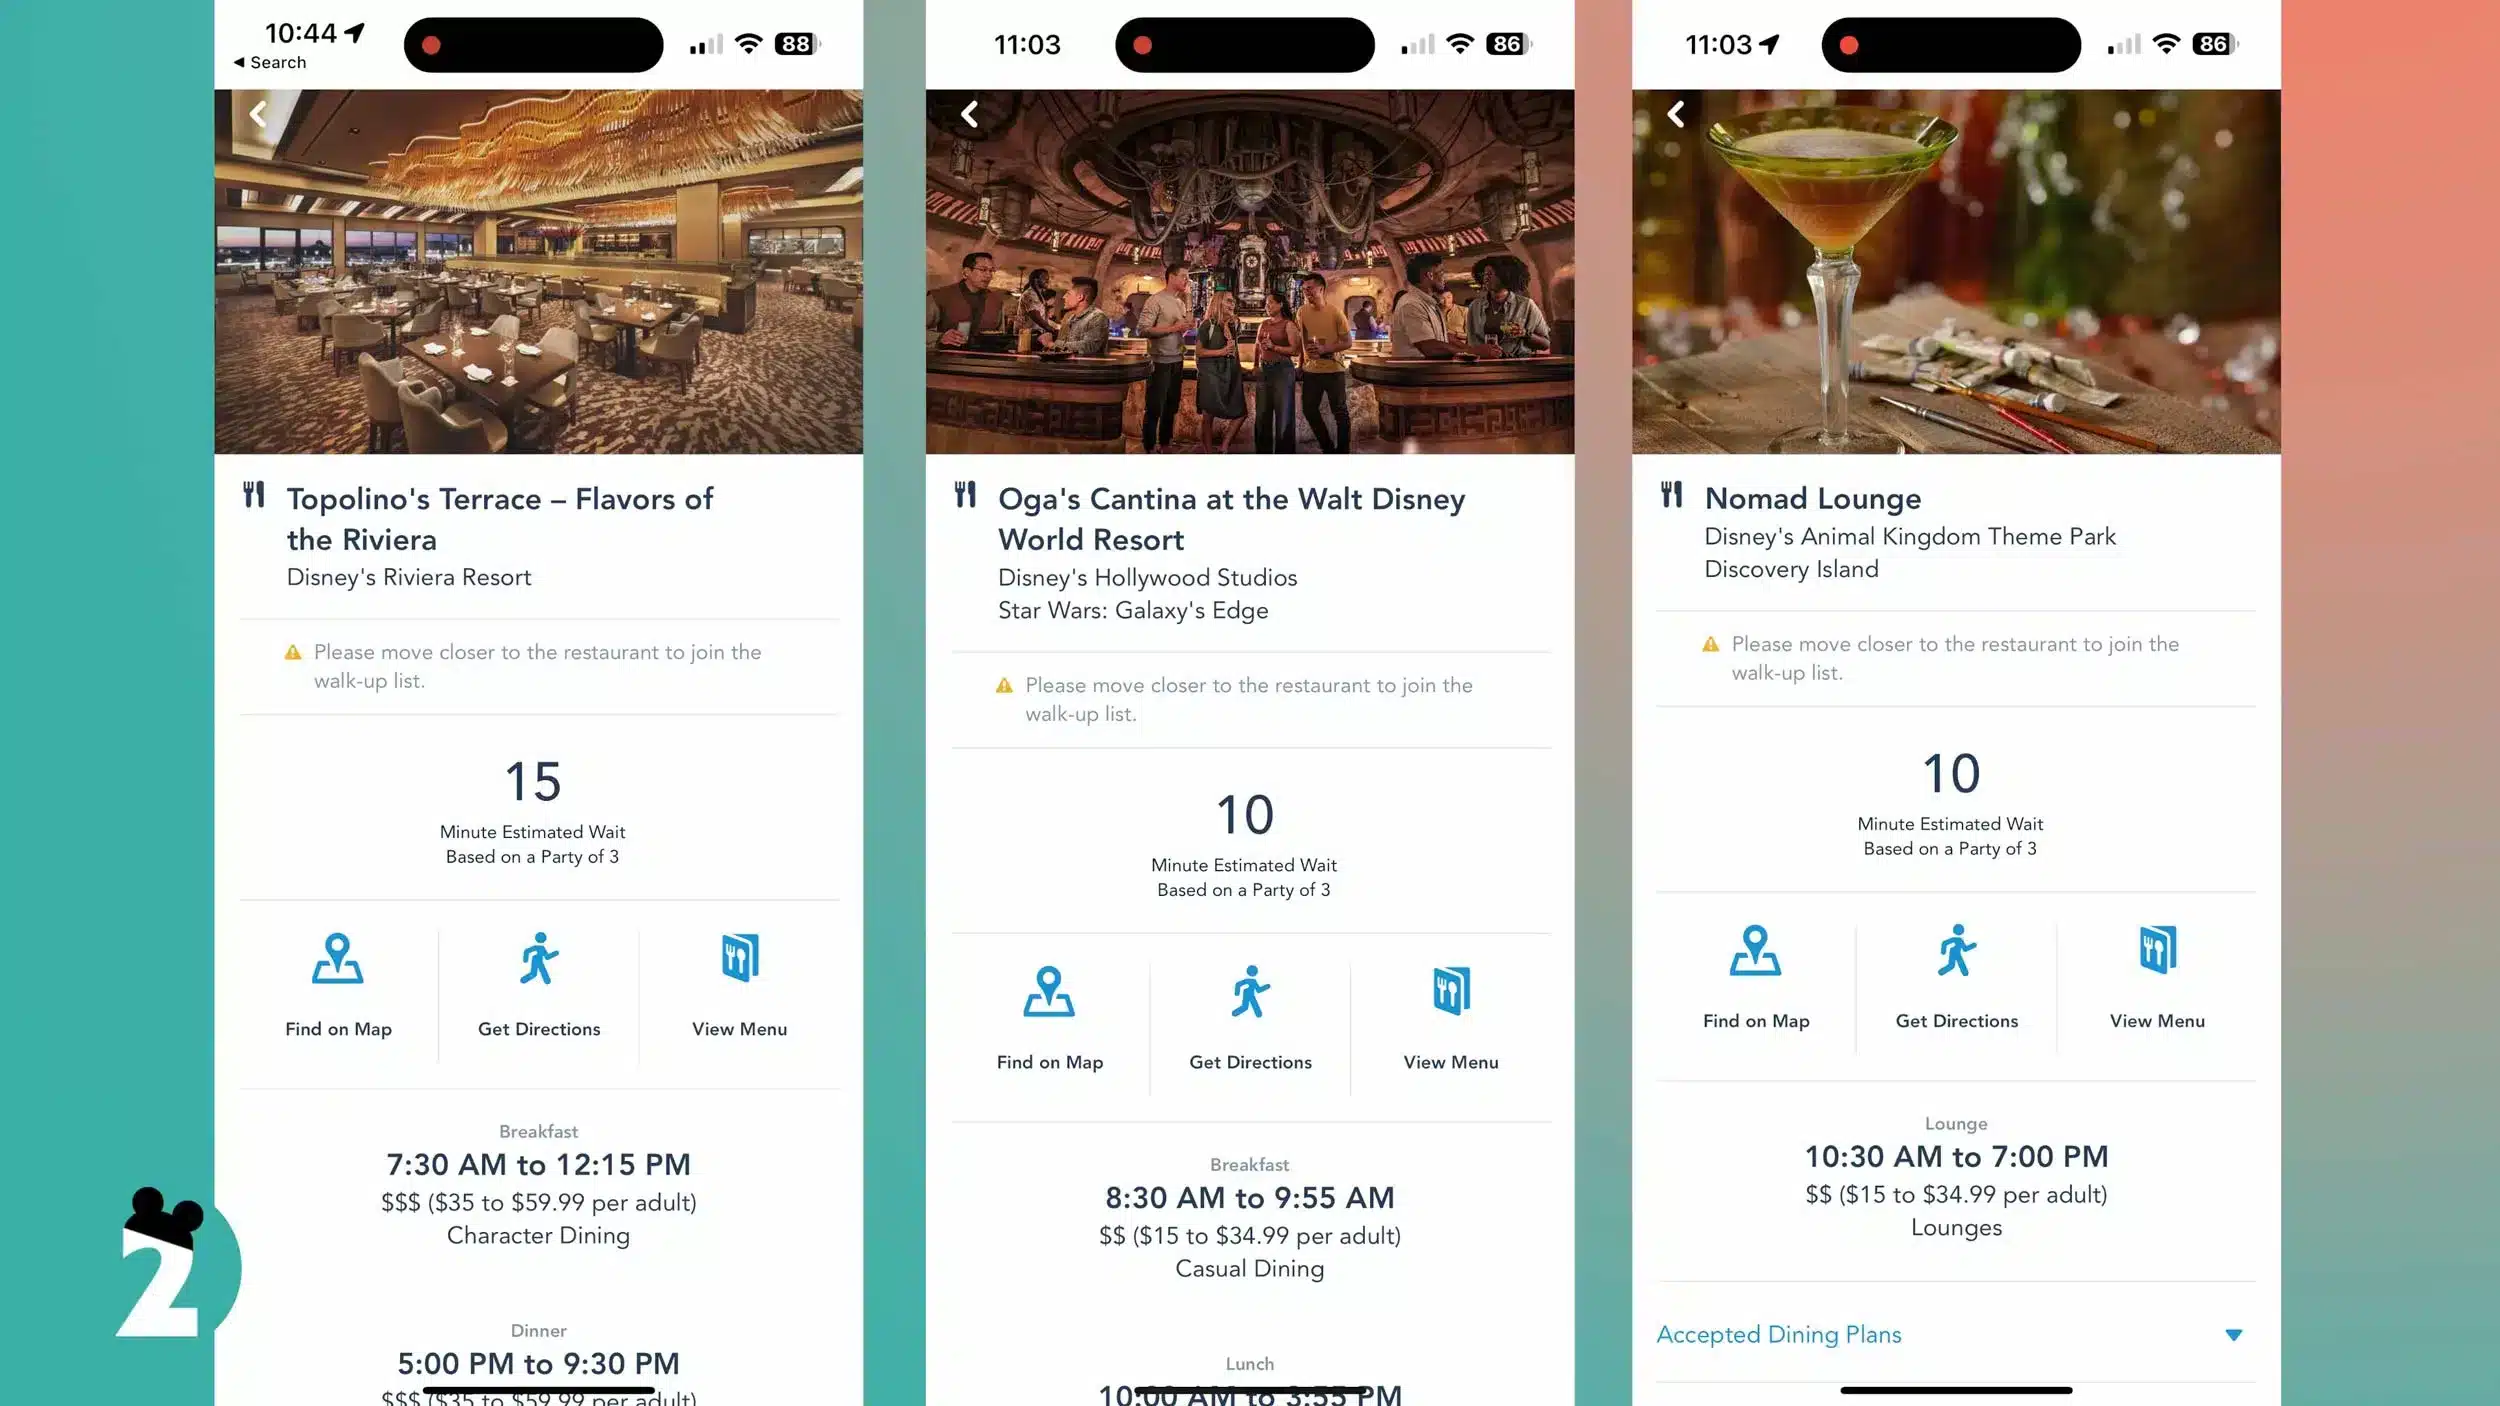 My Disney Experience App Screens for Topolino's Terrace, Oga's Cantina, and Nomad Lounge at Disney World, each with a wait under 15 minutes